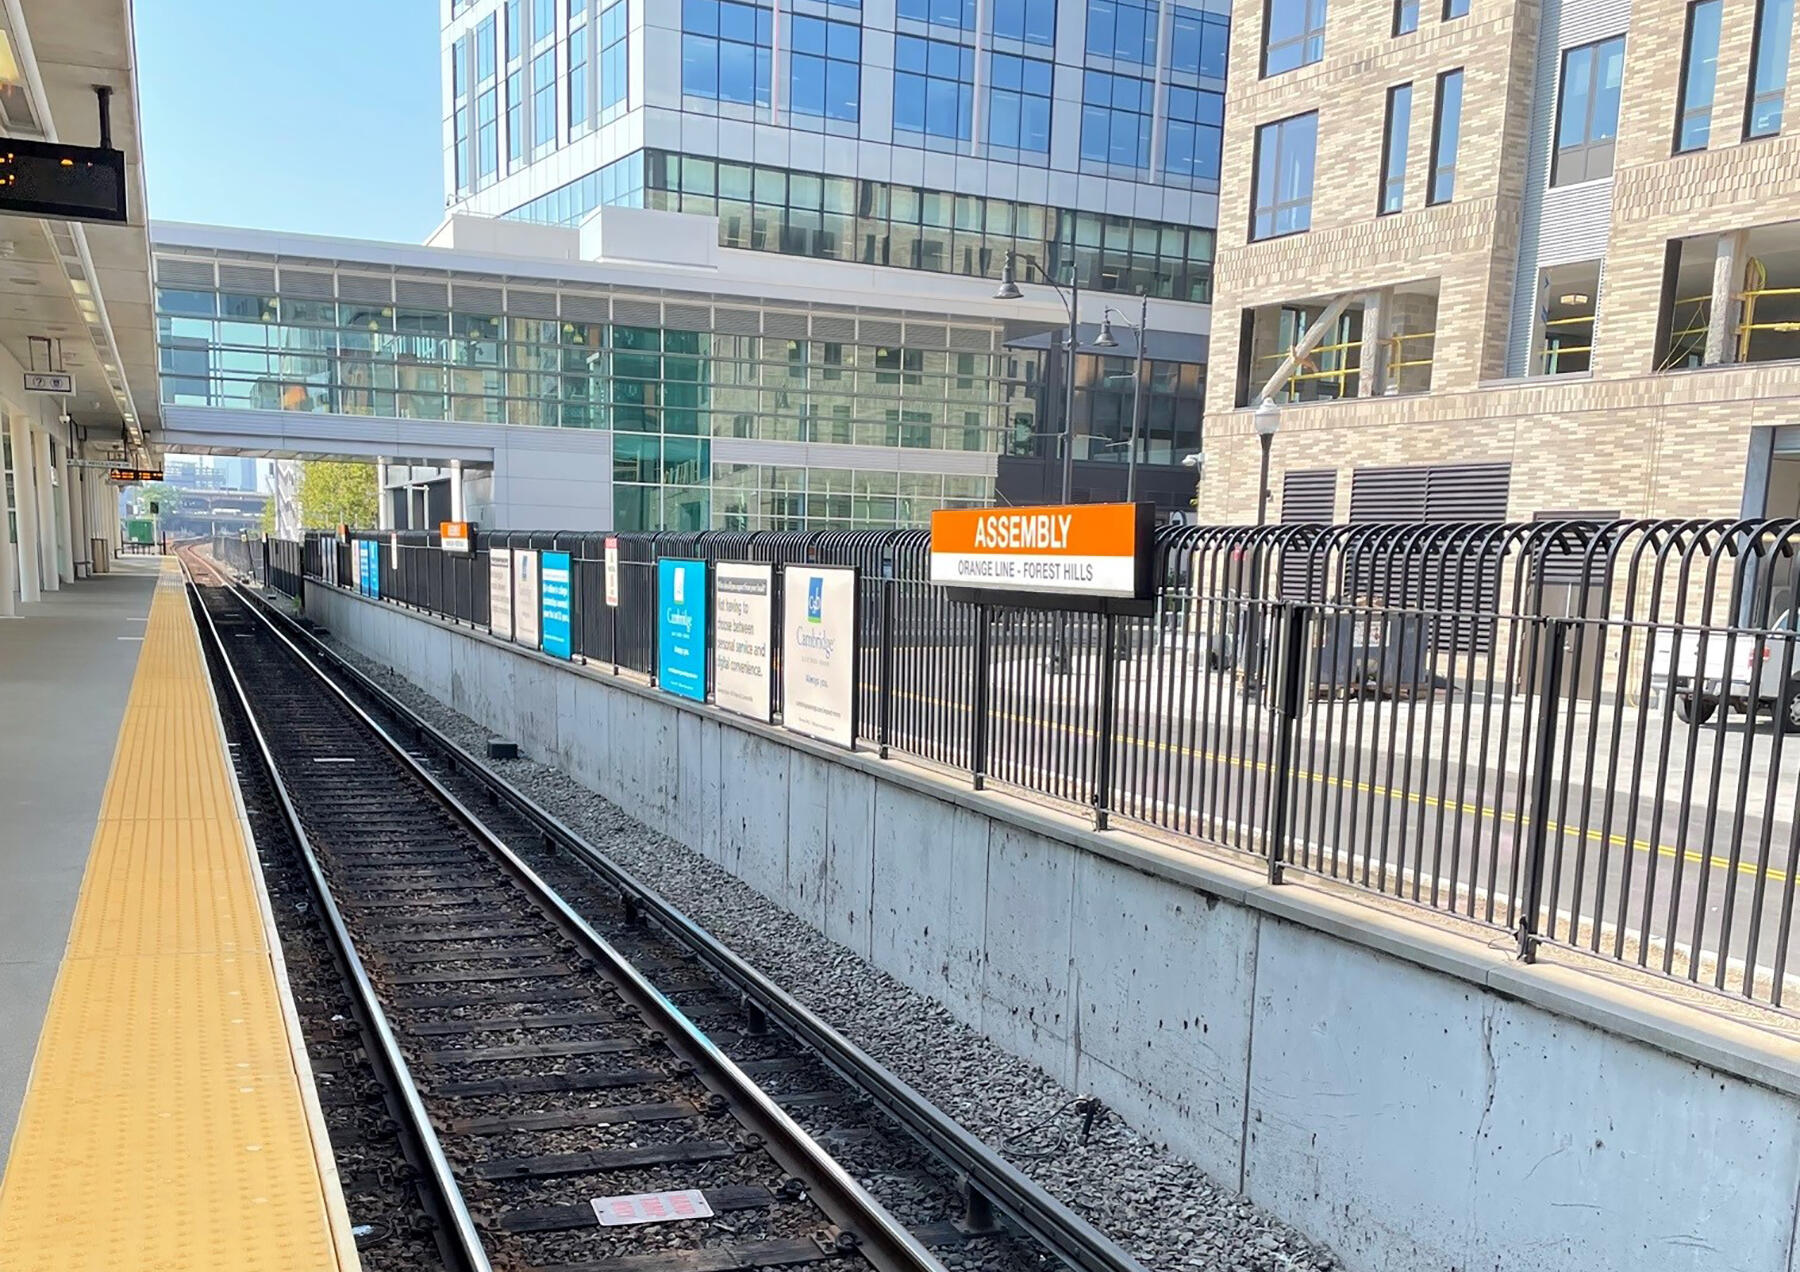 Major revitalization work will take place along the entirety of the Orange Line over 30 days from August 20 through September 19.